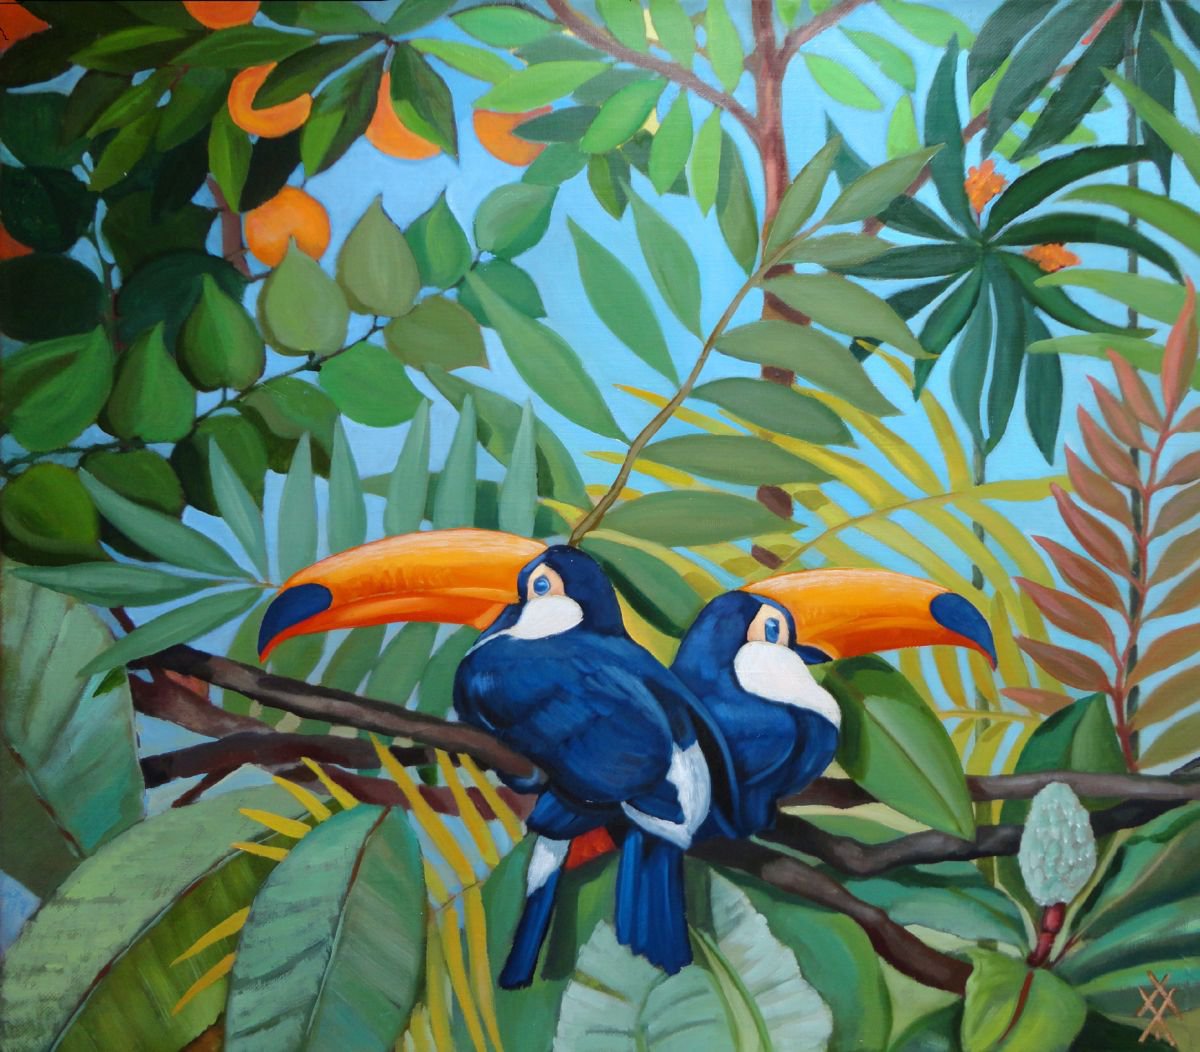 Toucans in the rainforest by Alla Khimich